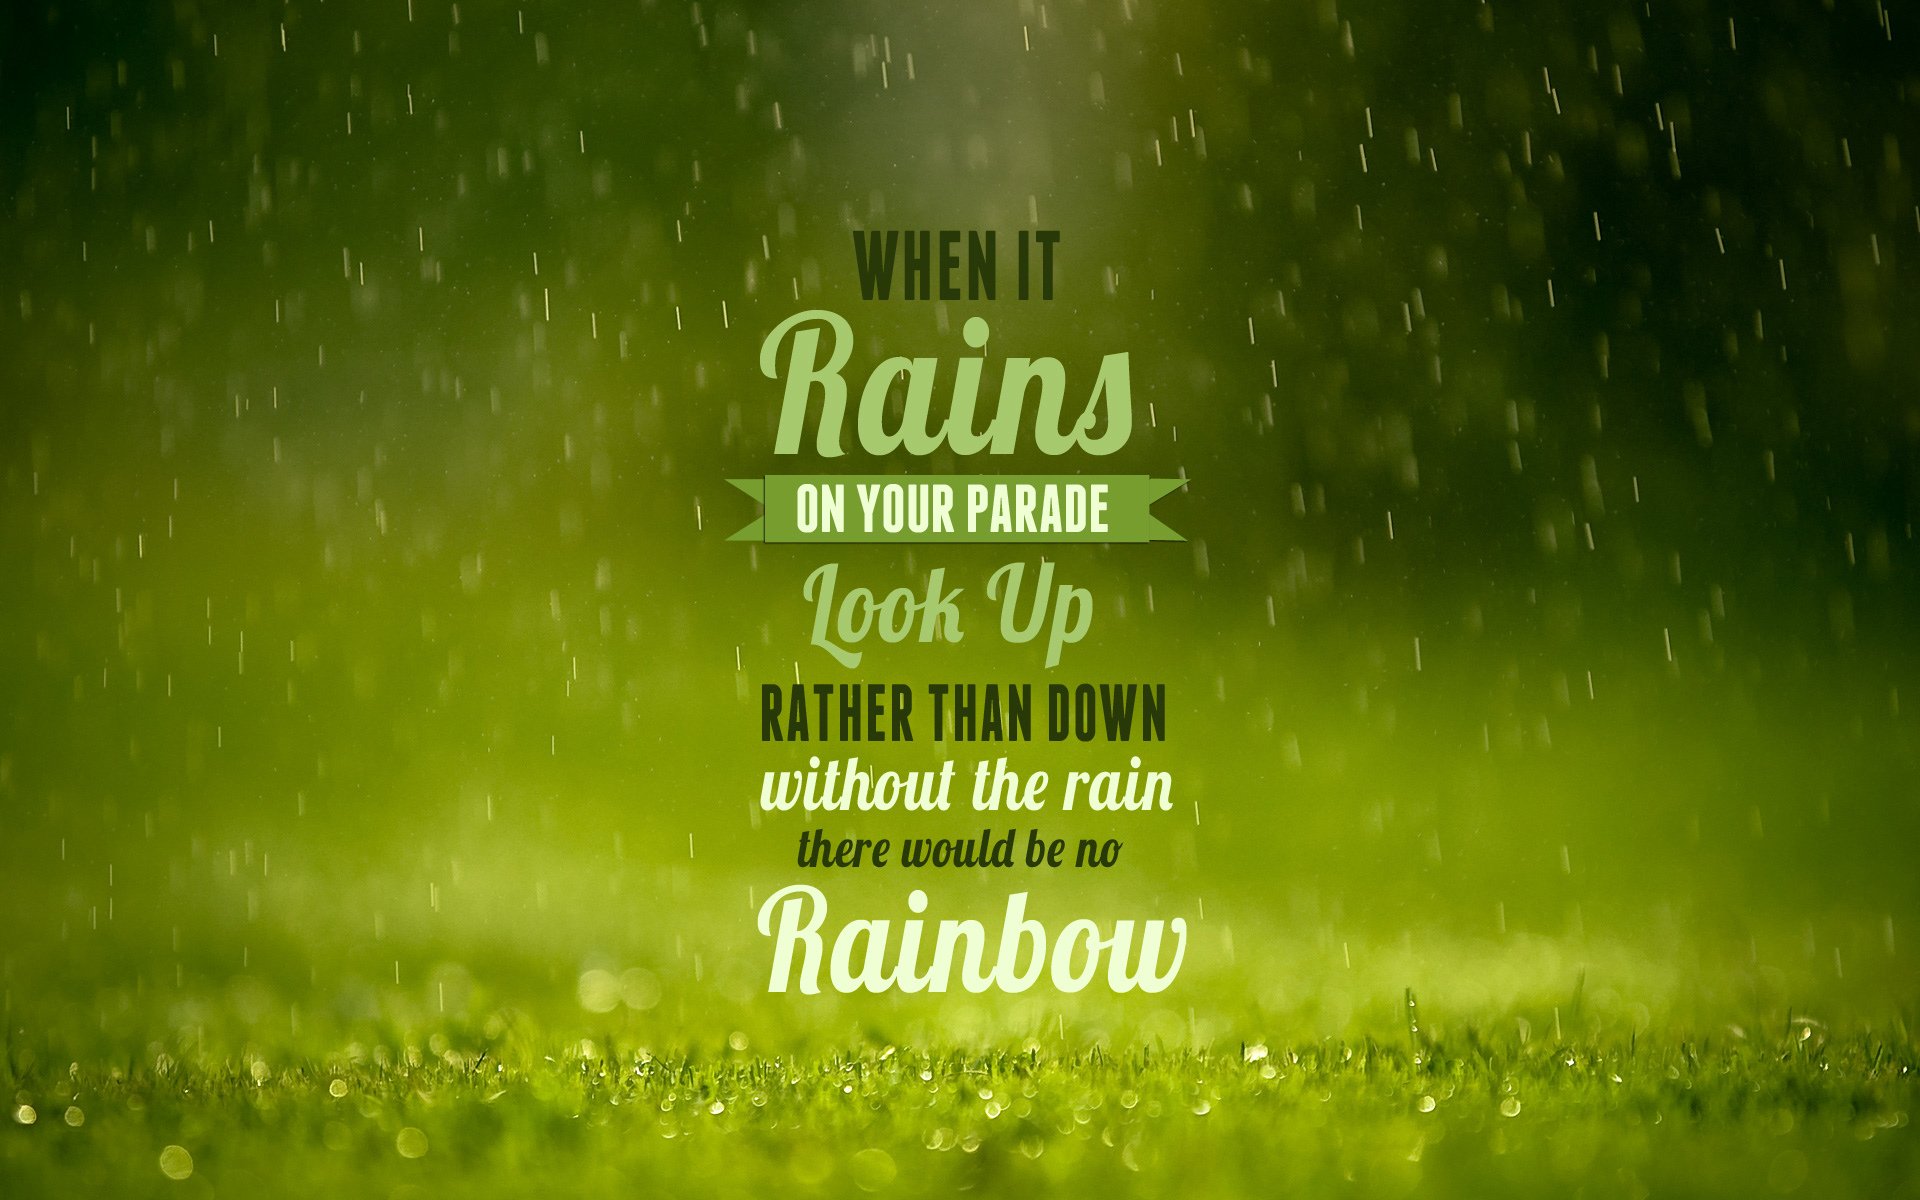 Rainy Day Quotes Hd Wallpapers - Inspirational Quotes About Rain - HD Wallpaper 